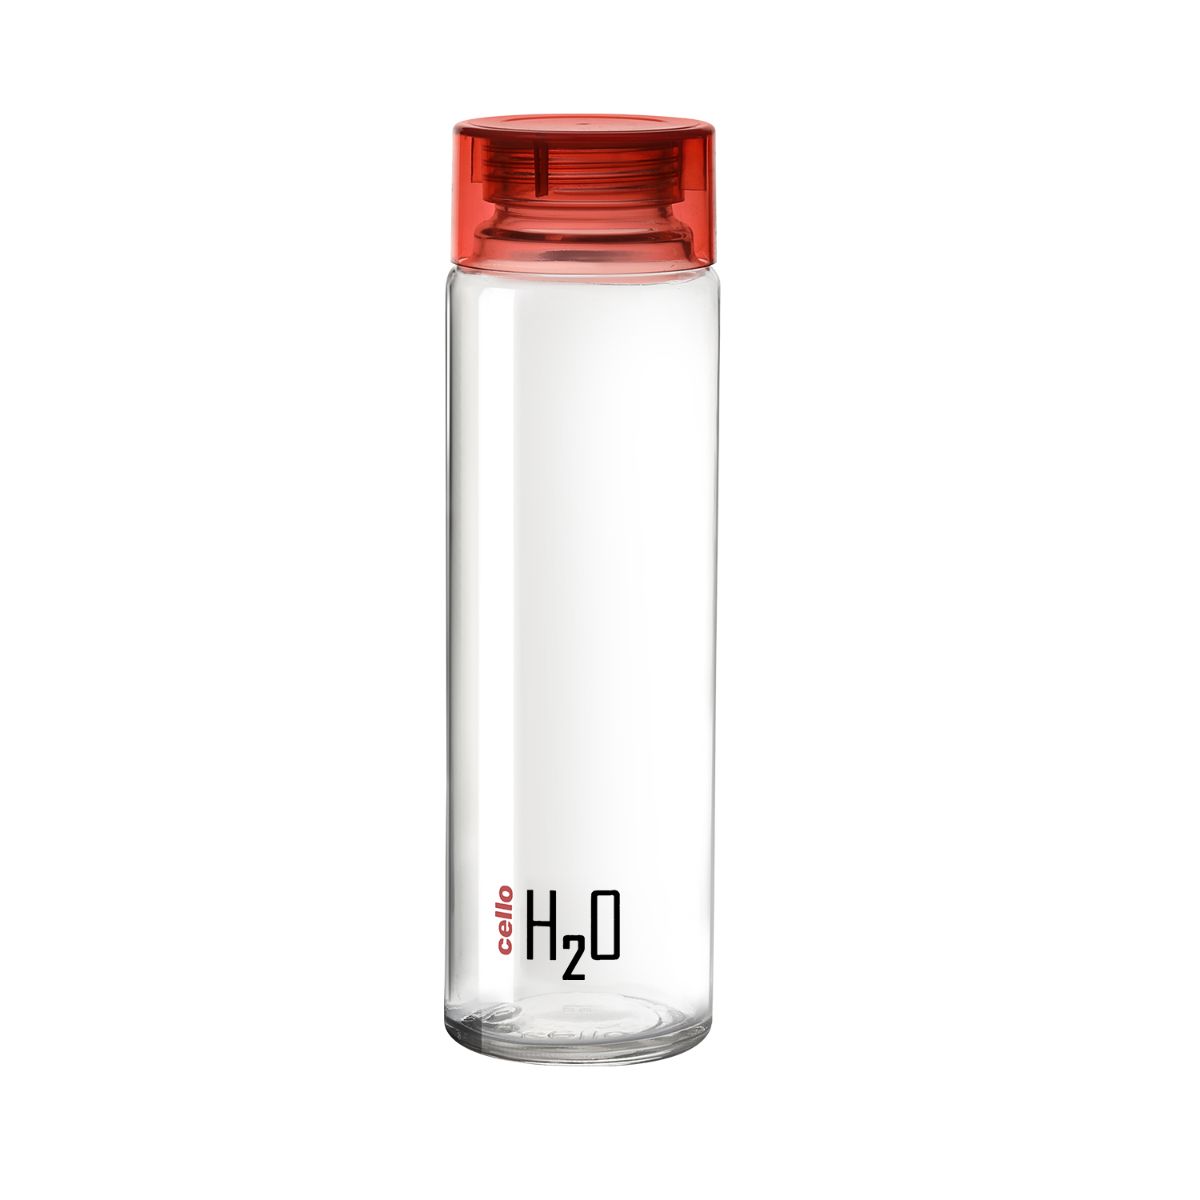 H2O Glass Water Bottle with Plastic Cap, 920ml Red / 920ml / 1 Piece